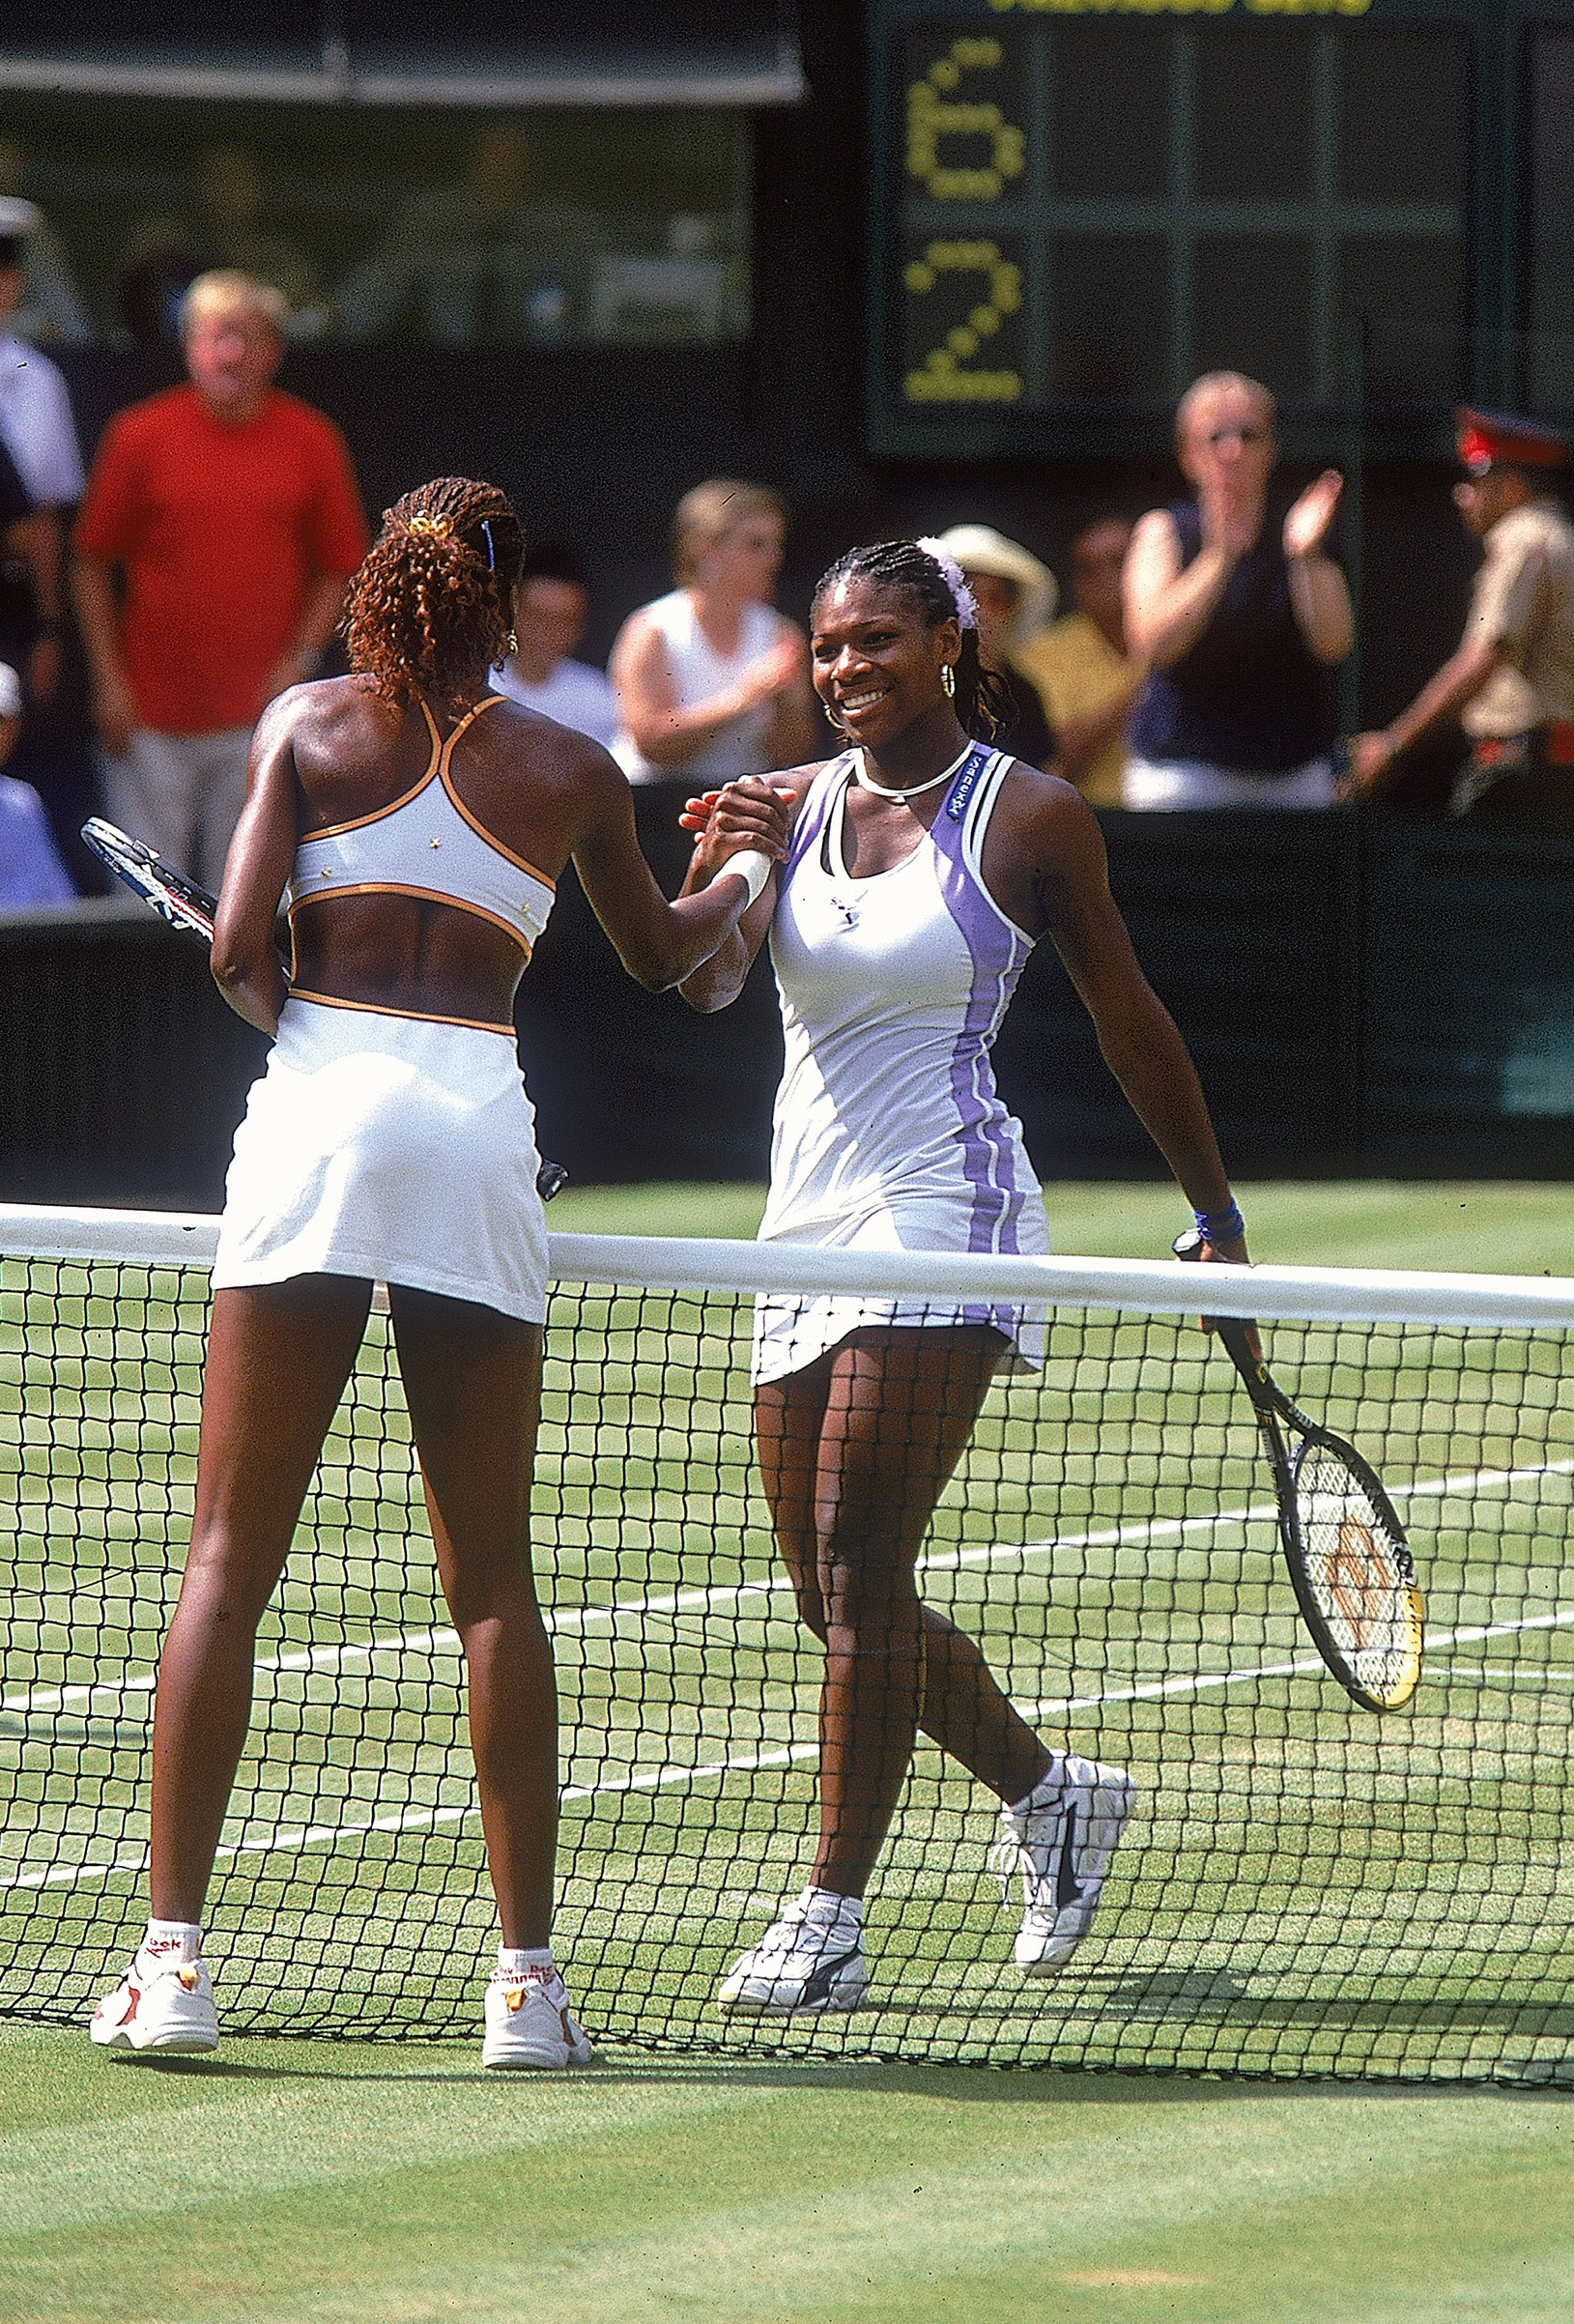 Serena Williams of the USA congratulates her sister Venus after losing to her in the womens semi final at the Wimbledon Lawn Tennis Championship at the All England Lawn Tennis and Croquet Club, Wimbledon, London on Jul 6, 2000. (Gary M. Prior—Getty Images)